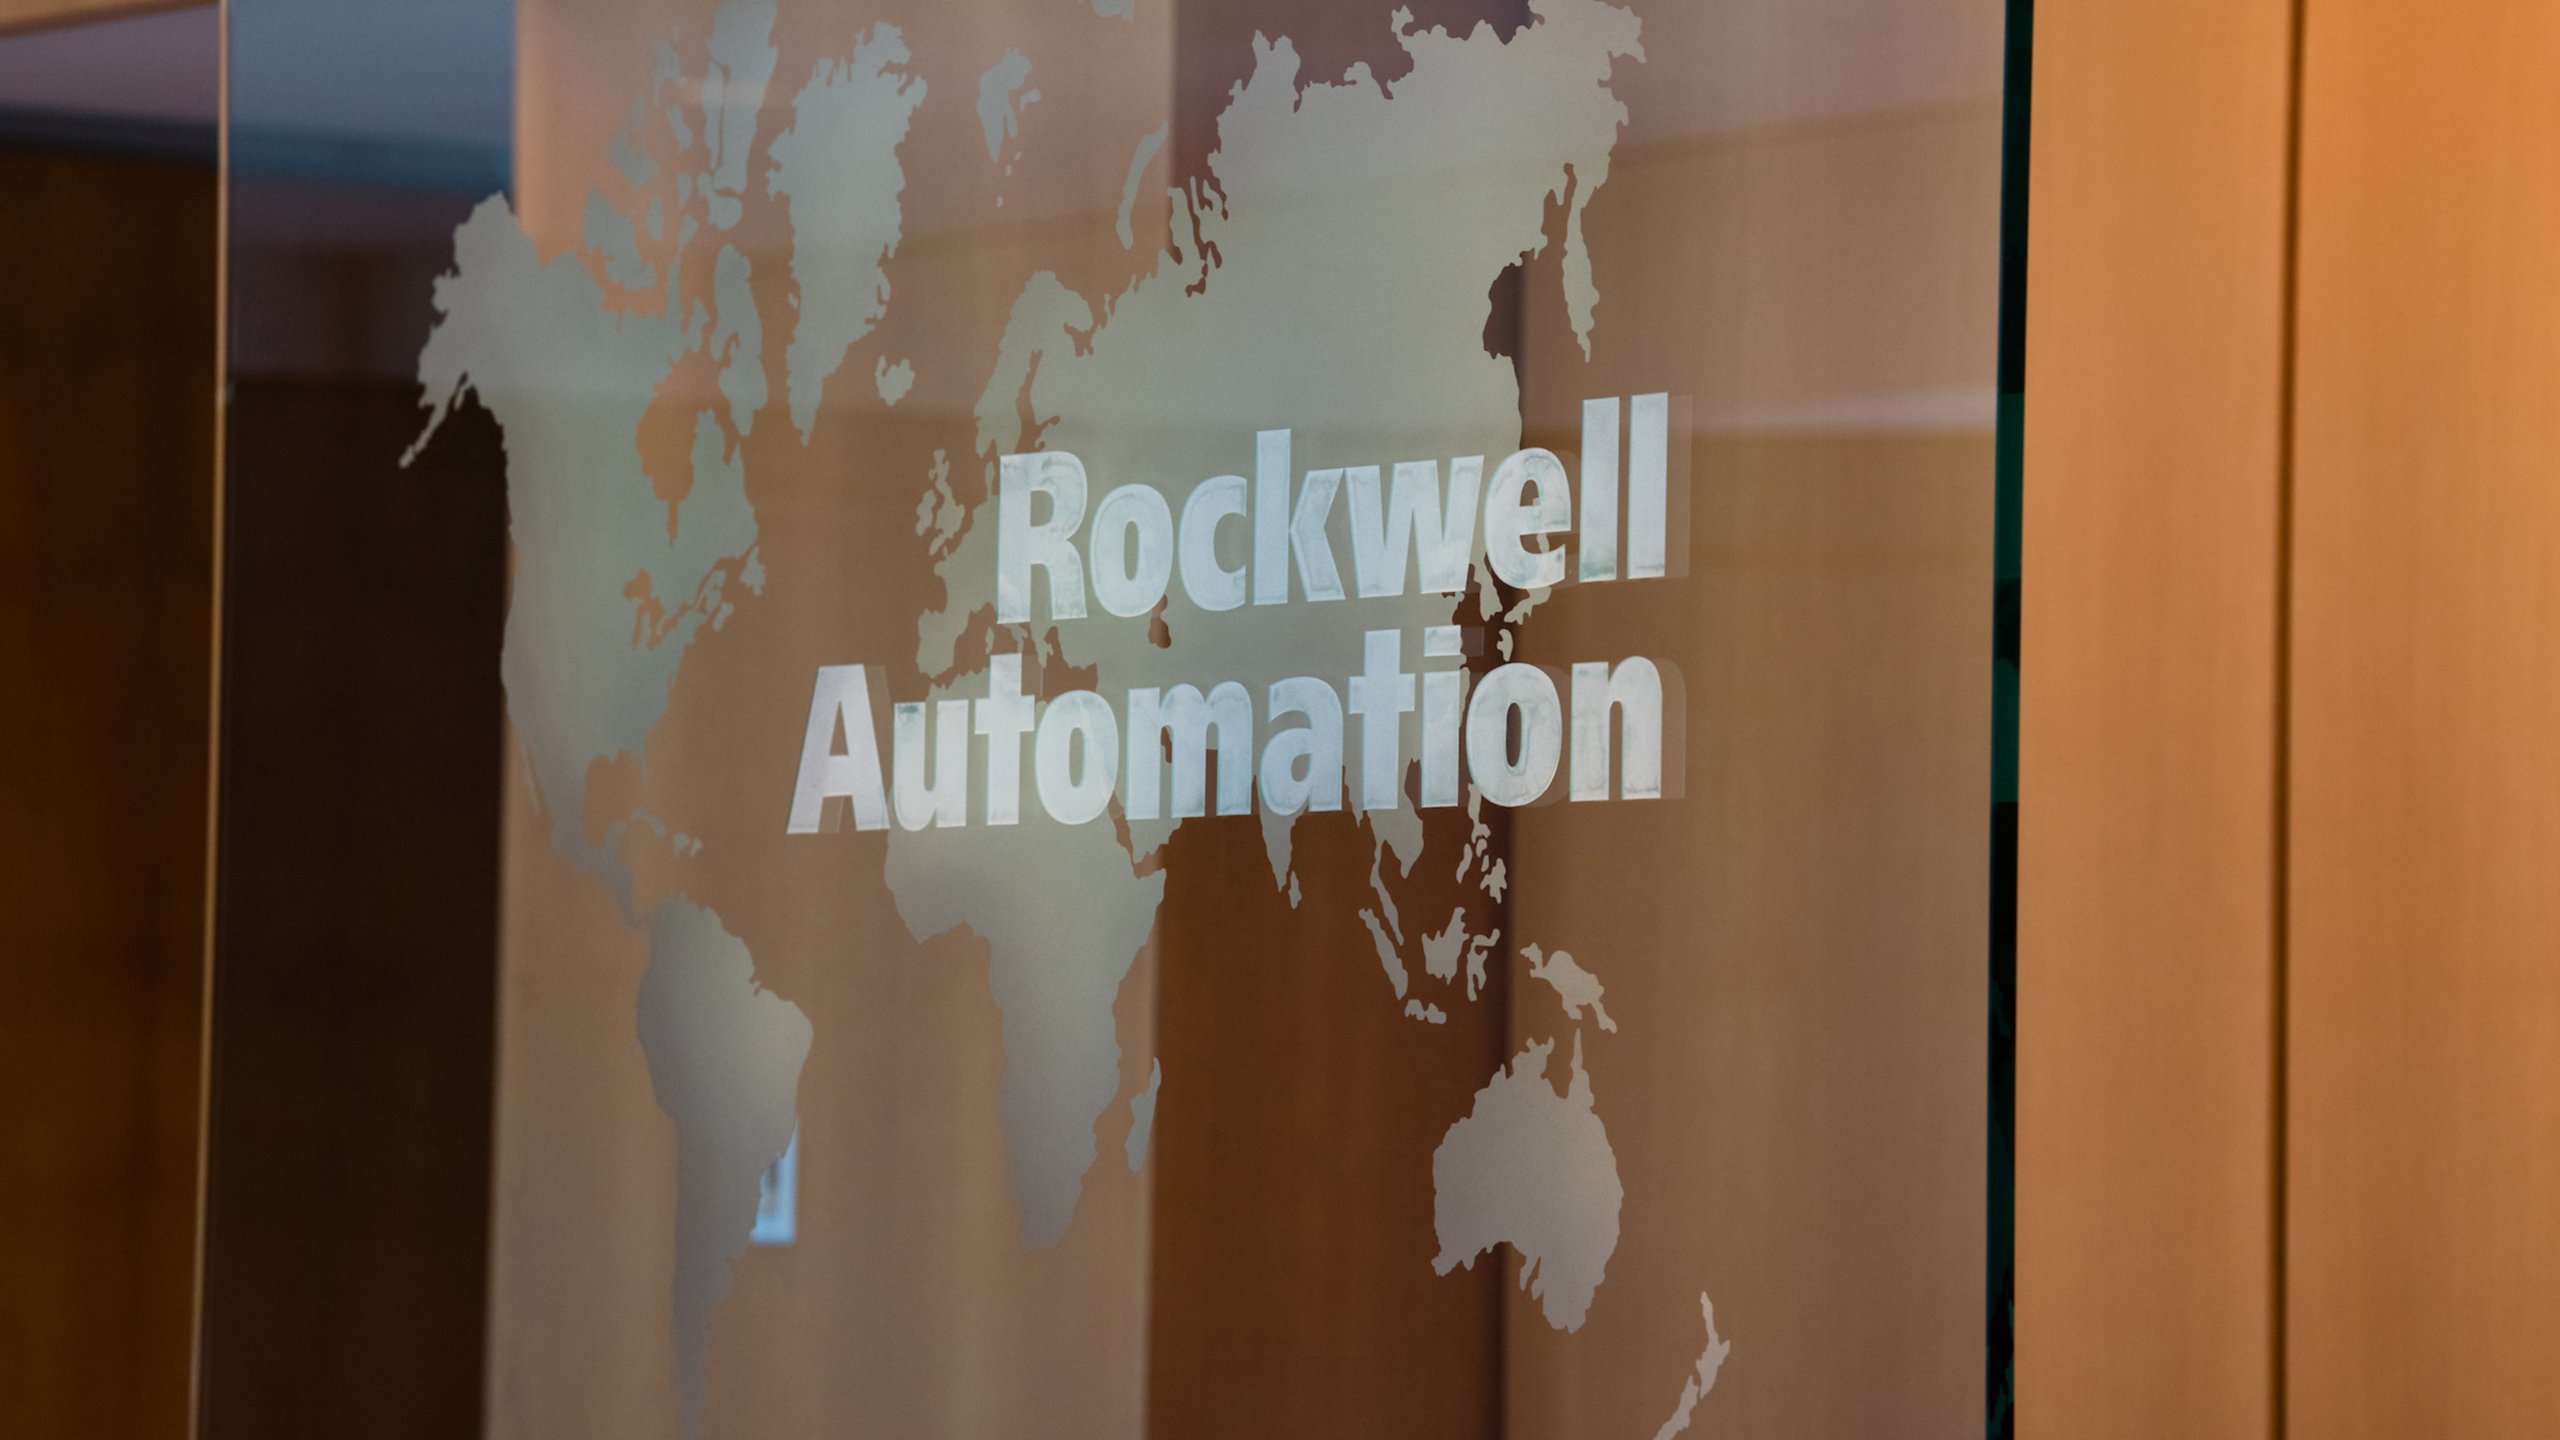 Photos at Rockwell Automation on June 4, 2018.